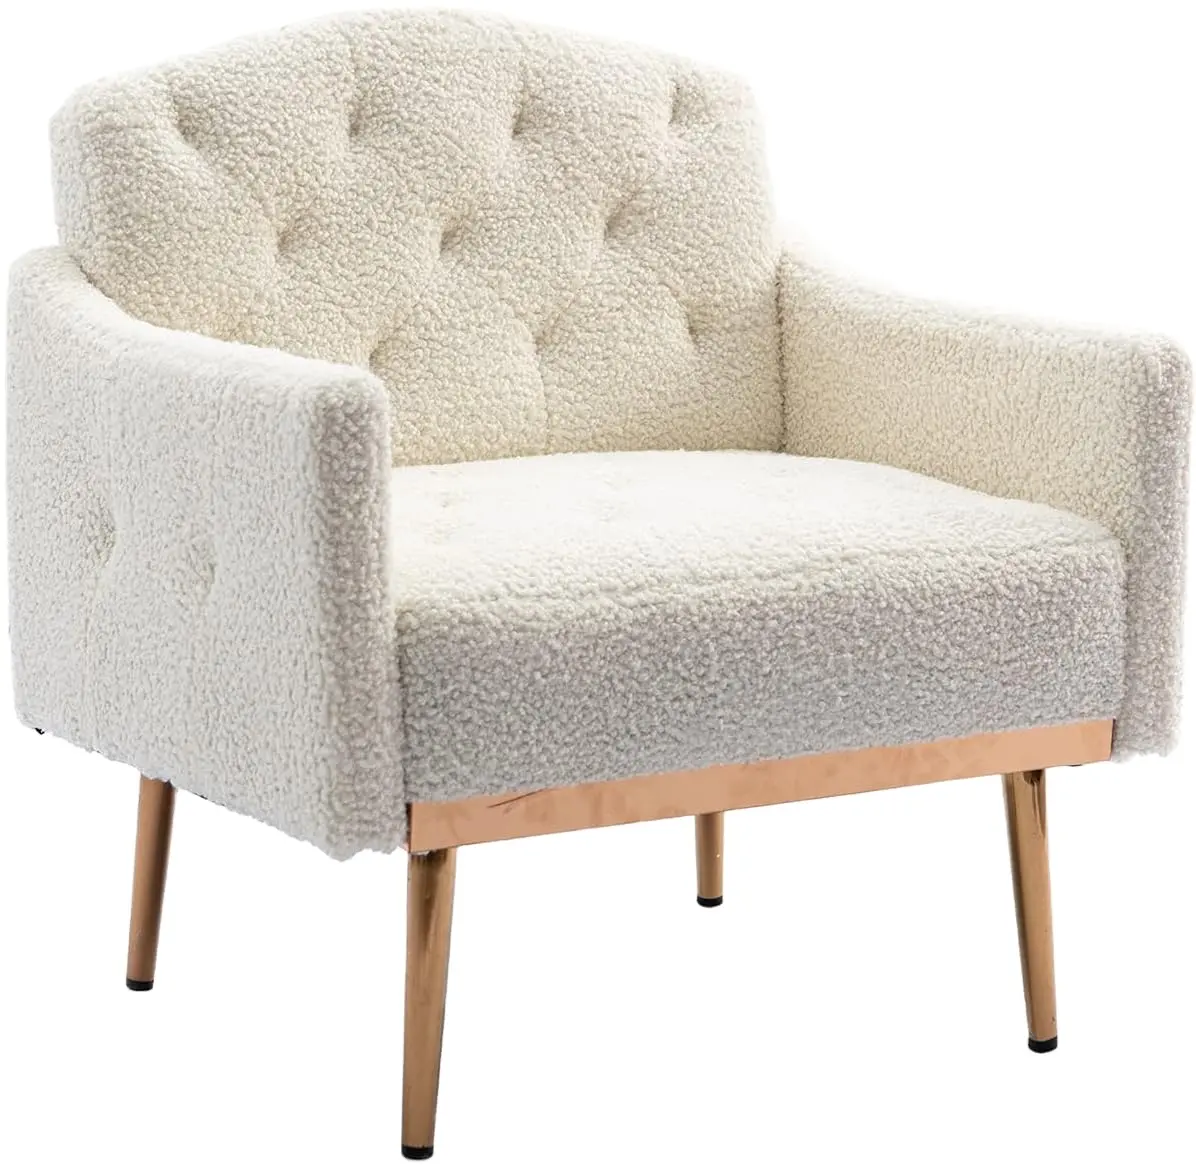 TOSEE Indoor Decorative Modern Styles Tufted Teddy Fabric Golden Legs Soft Cushion Upholstered Armchair